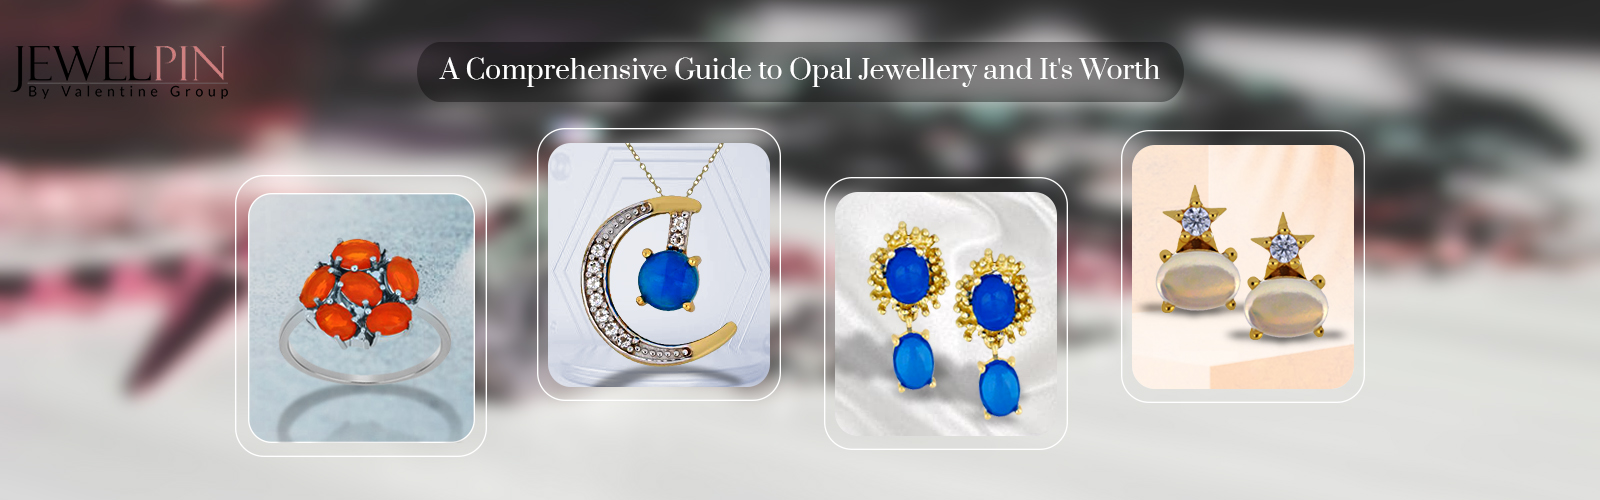 A Comprehensive Guide to Opal Jewellery and Its Worth with JewelPin